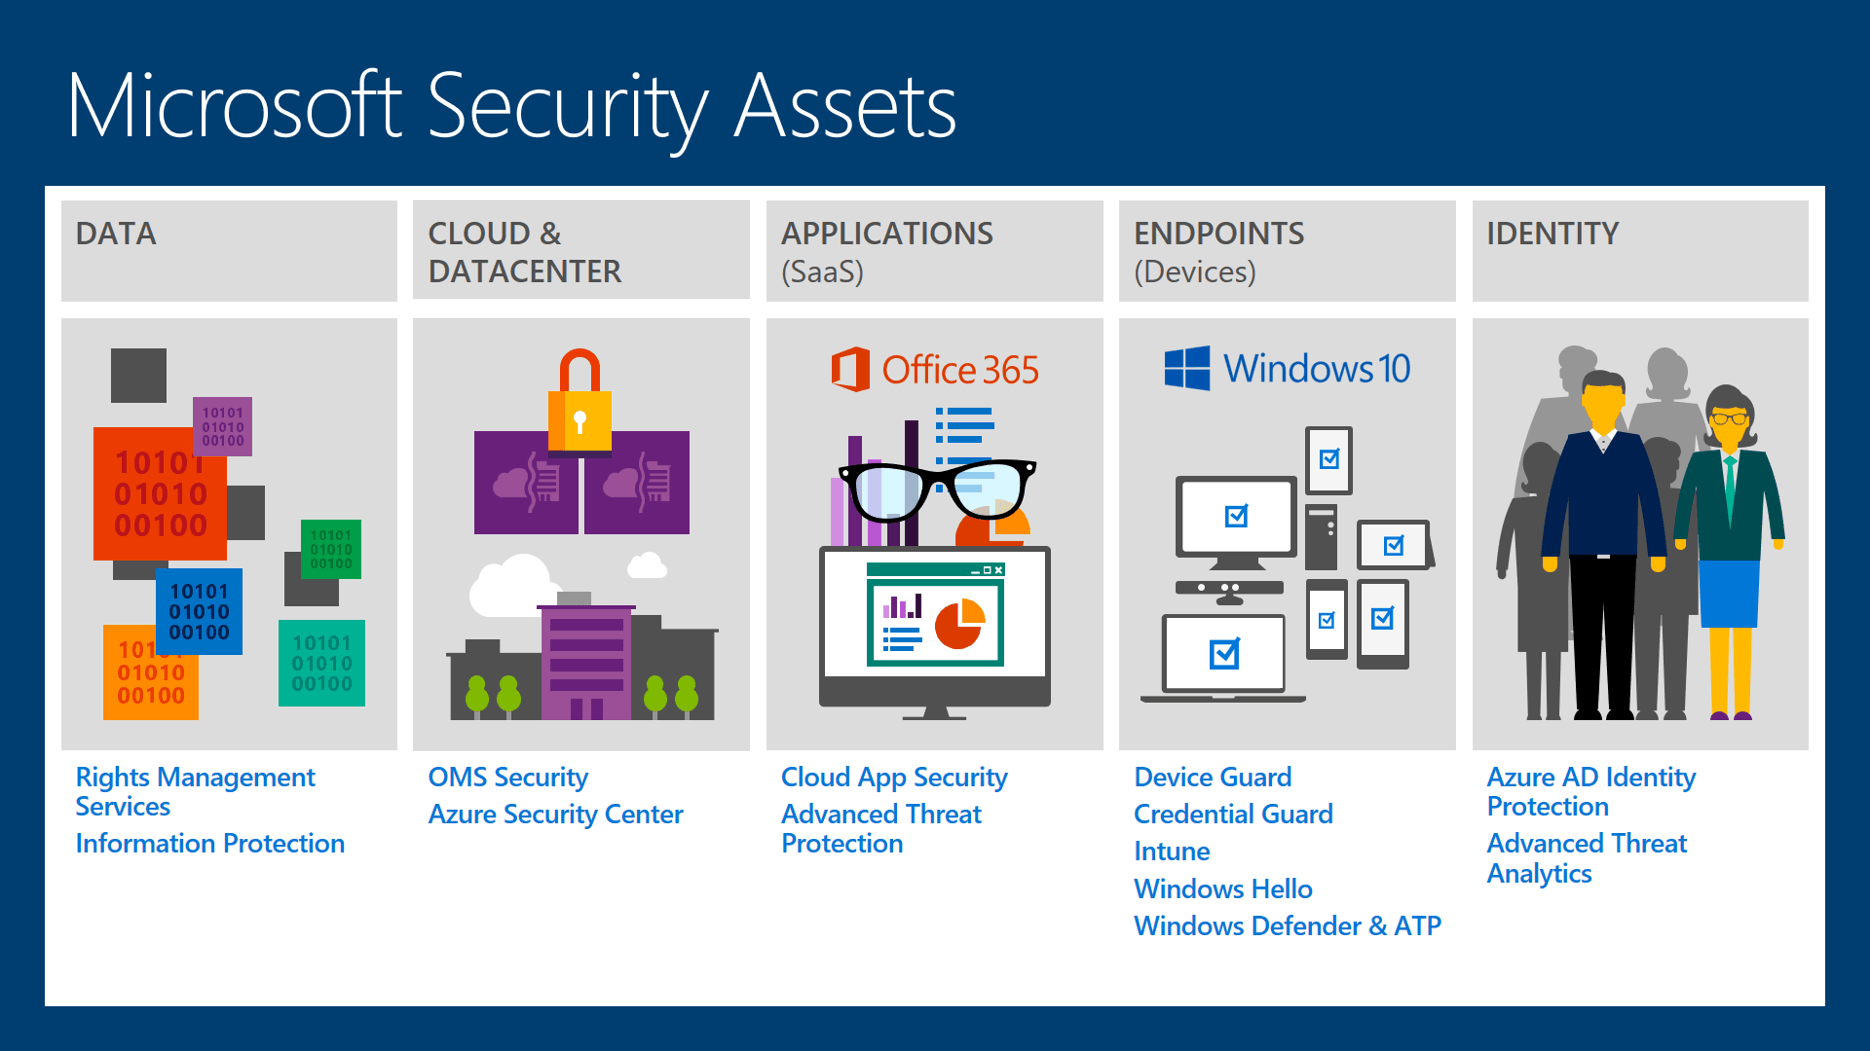 NetBus Security: Understand the security features and precautions of NetBus to ensure safe usage
Microsoft Store: Explore a wide range of other useful apps and software available on the Microsoft Store